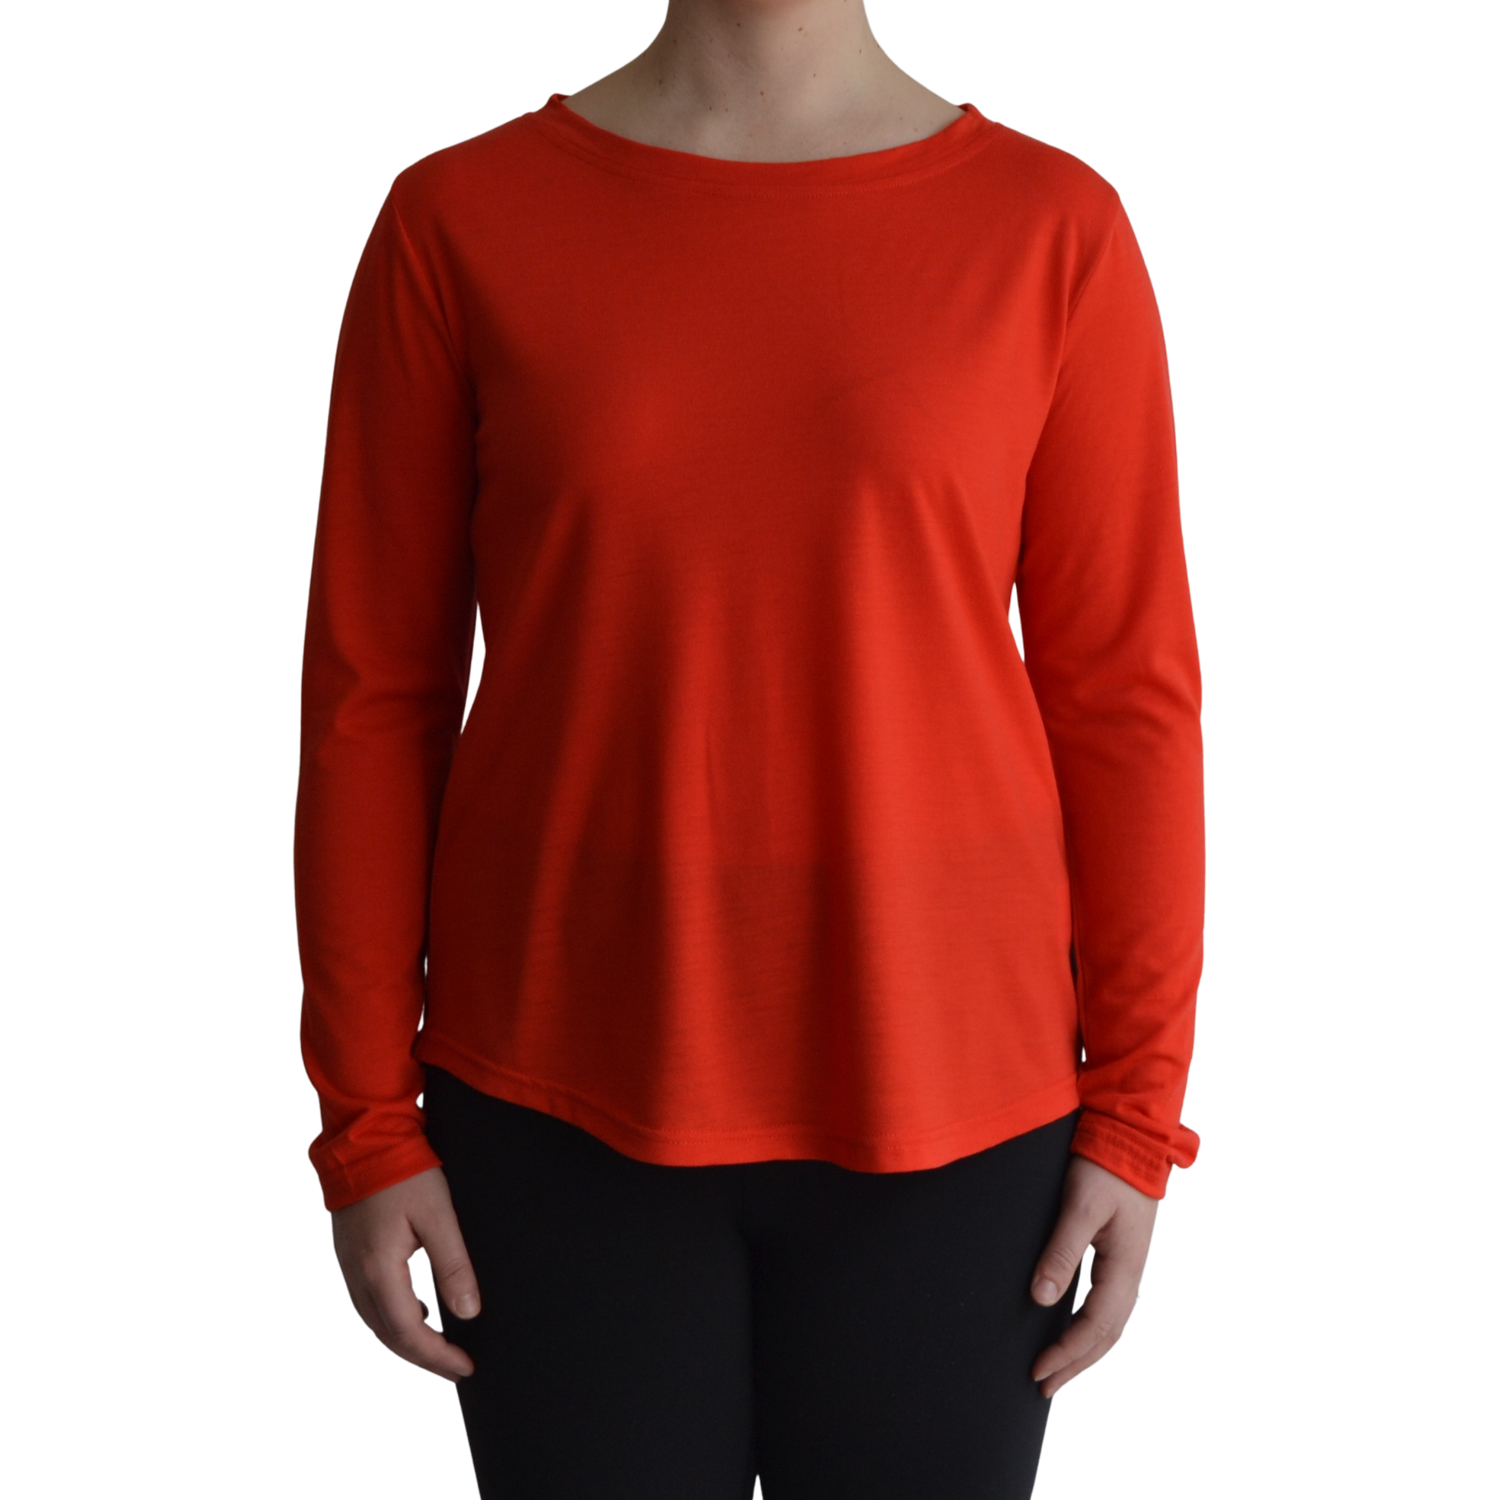 Links long sleeve merino top in mandarin colour, model faces forward showing the front of the top with scooped neck and hemline.. 